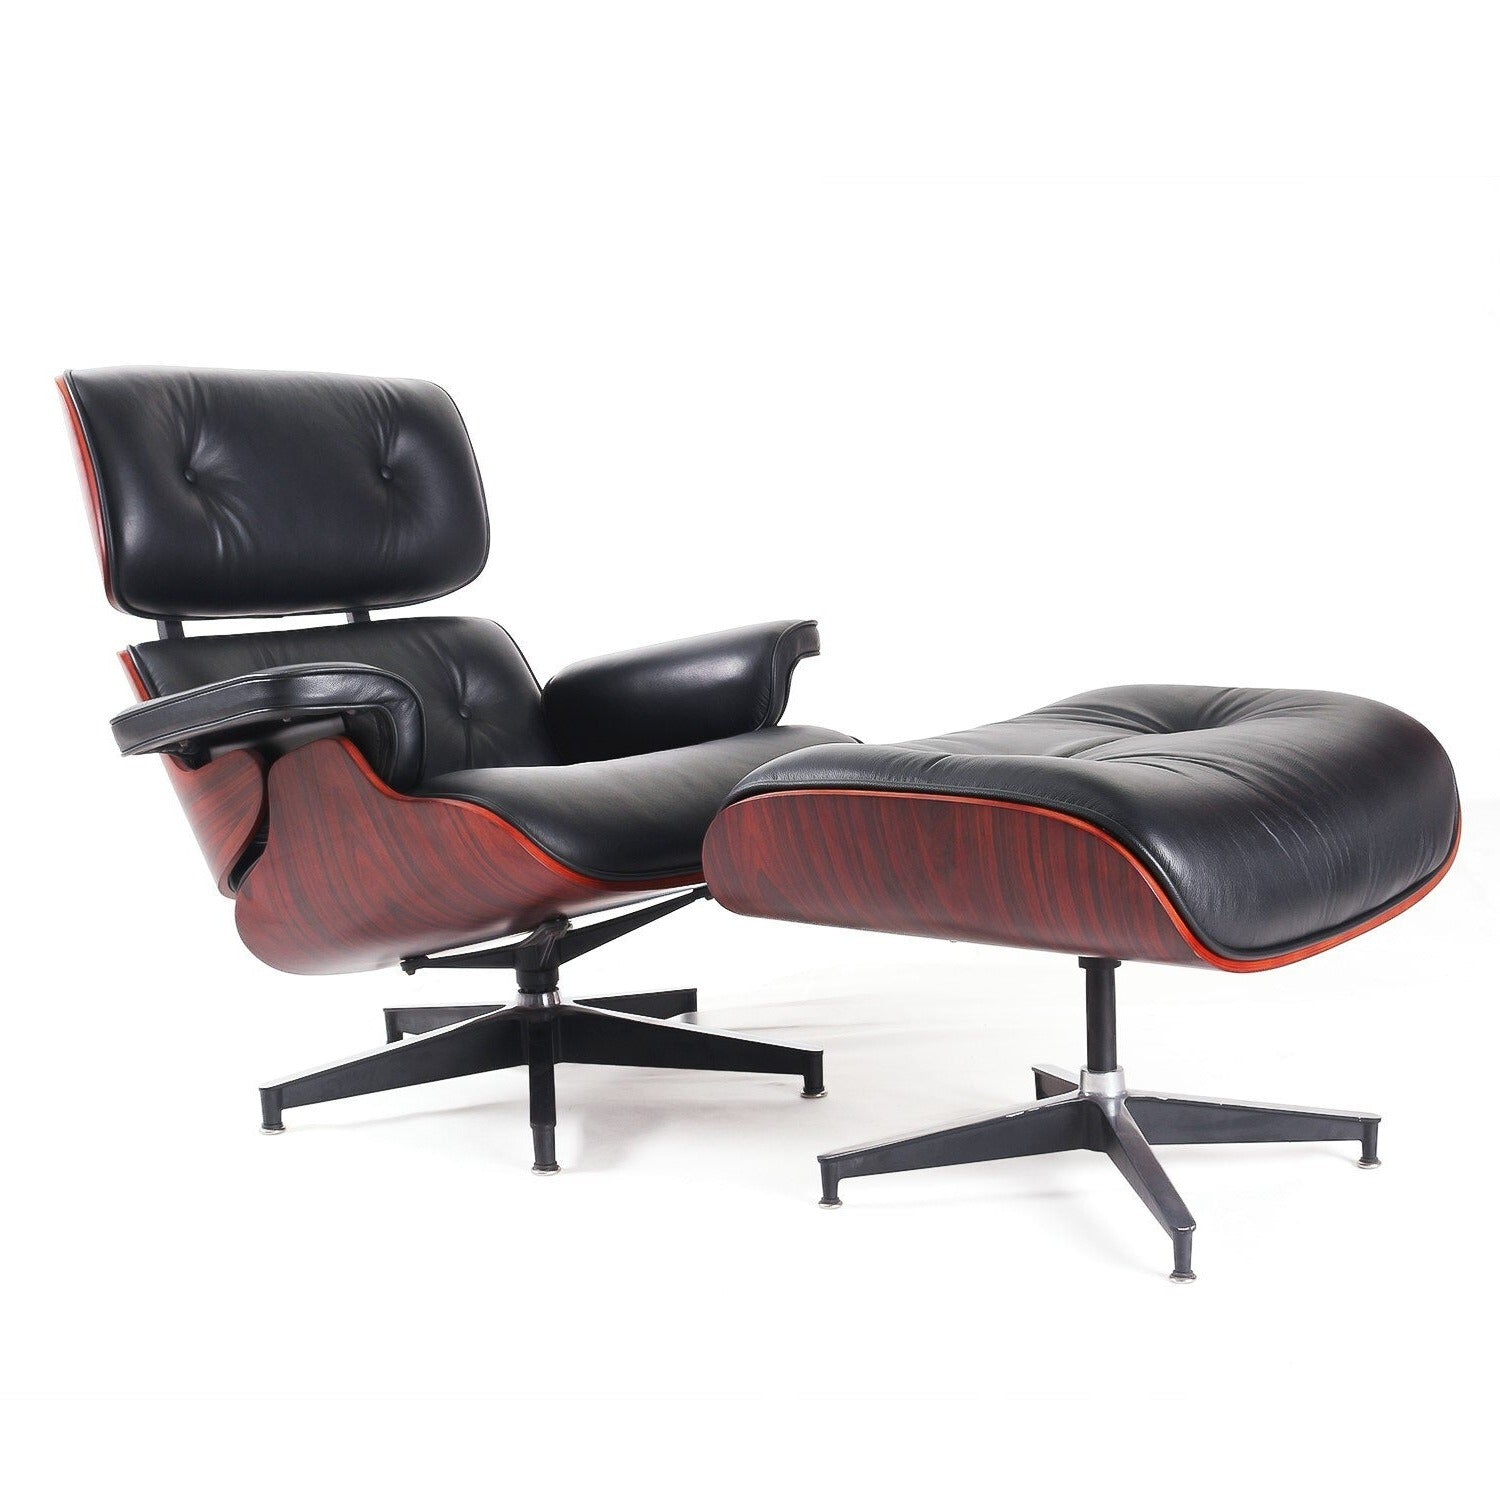 Homio Decor Living Room Classic Leather Lounge Chair with Ottoman